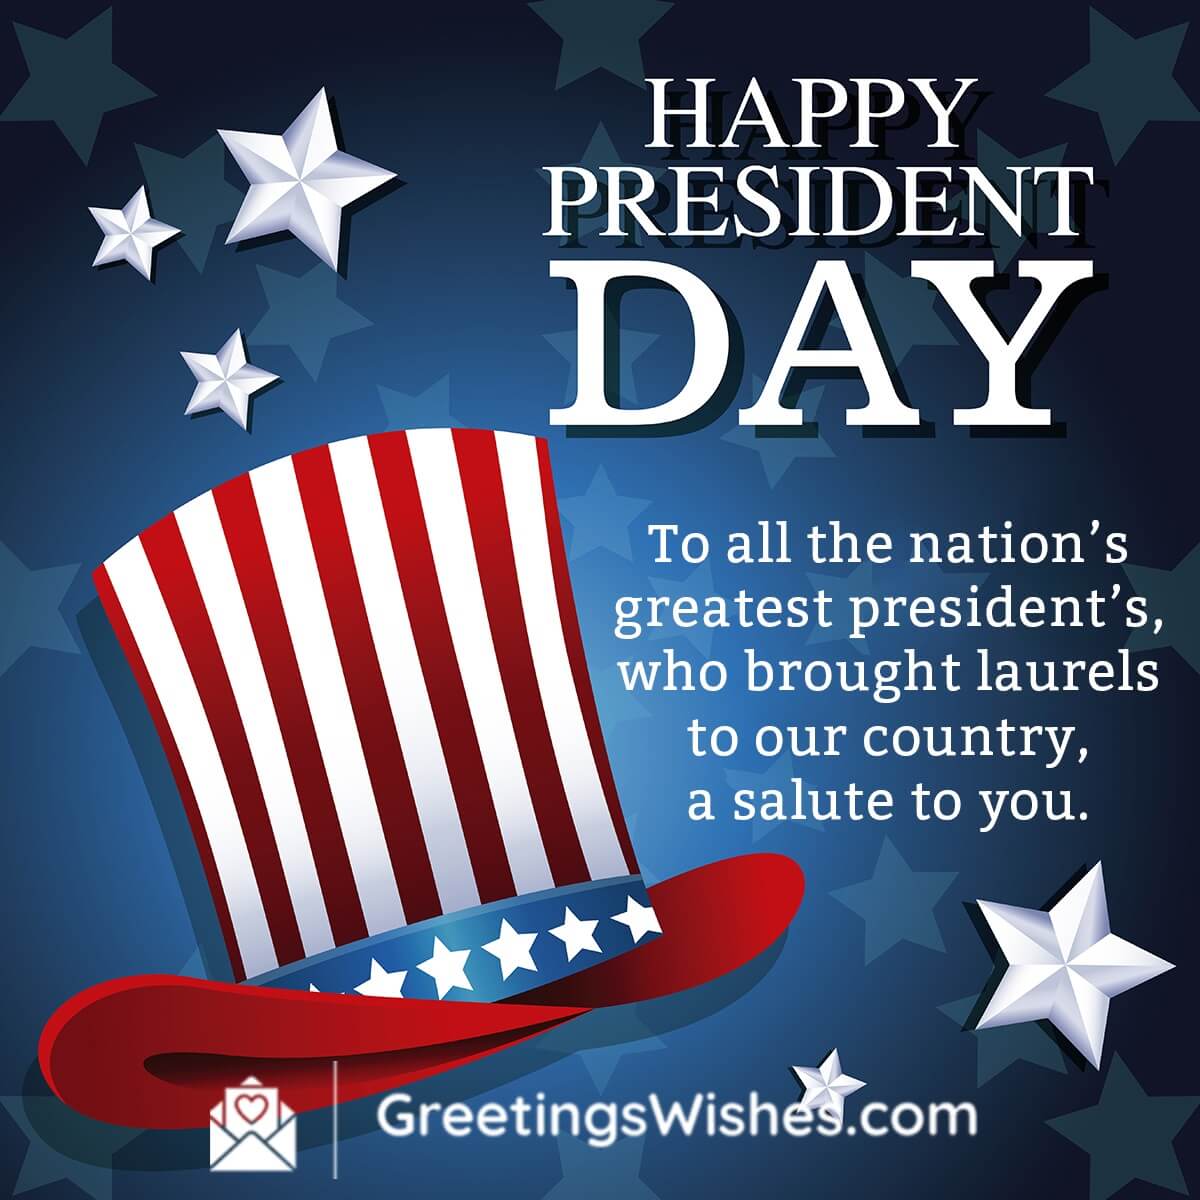 Happy President Day Greetings